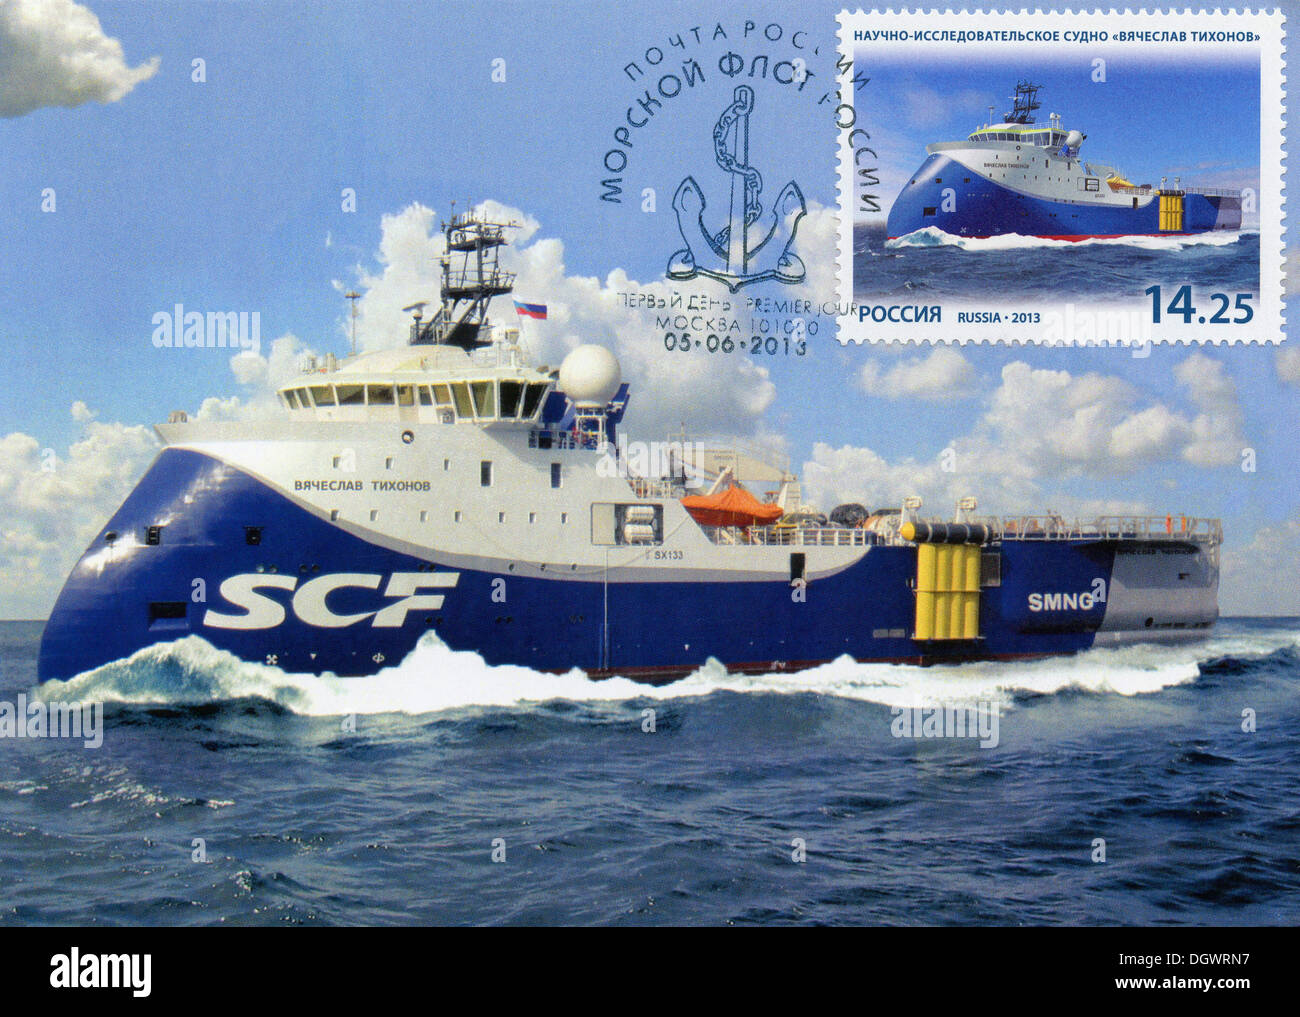 Russia postage stamp depicting a geophysical exploration research vessel 'Viacheslav Tikhonov' Stock Photo